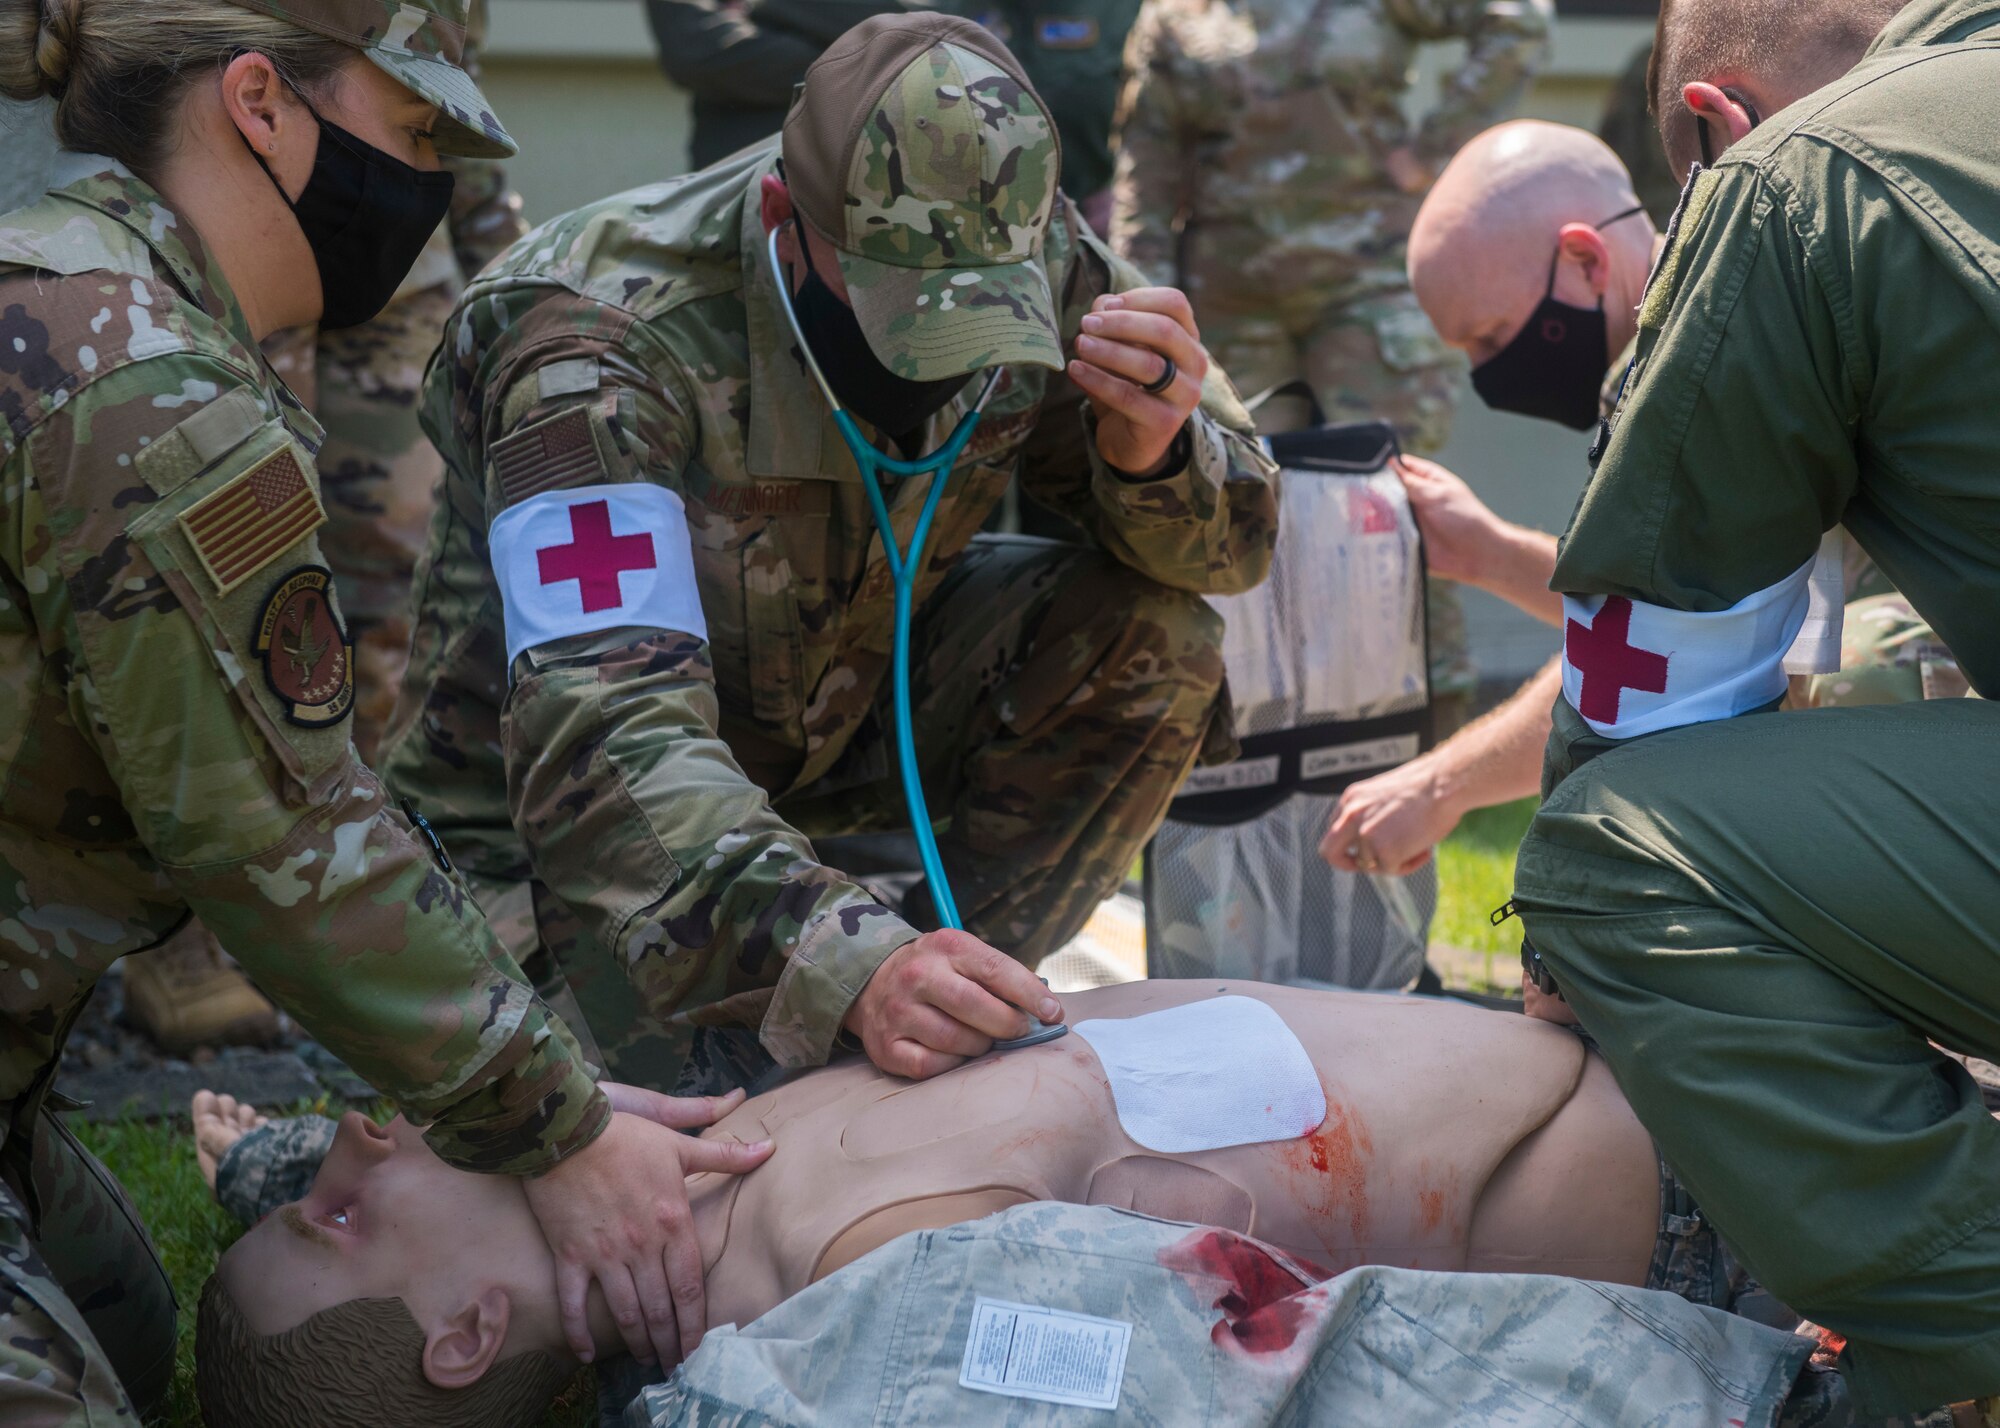 Group of servicemembers in uniform check for vitals on a simulated wounded patient